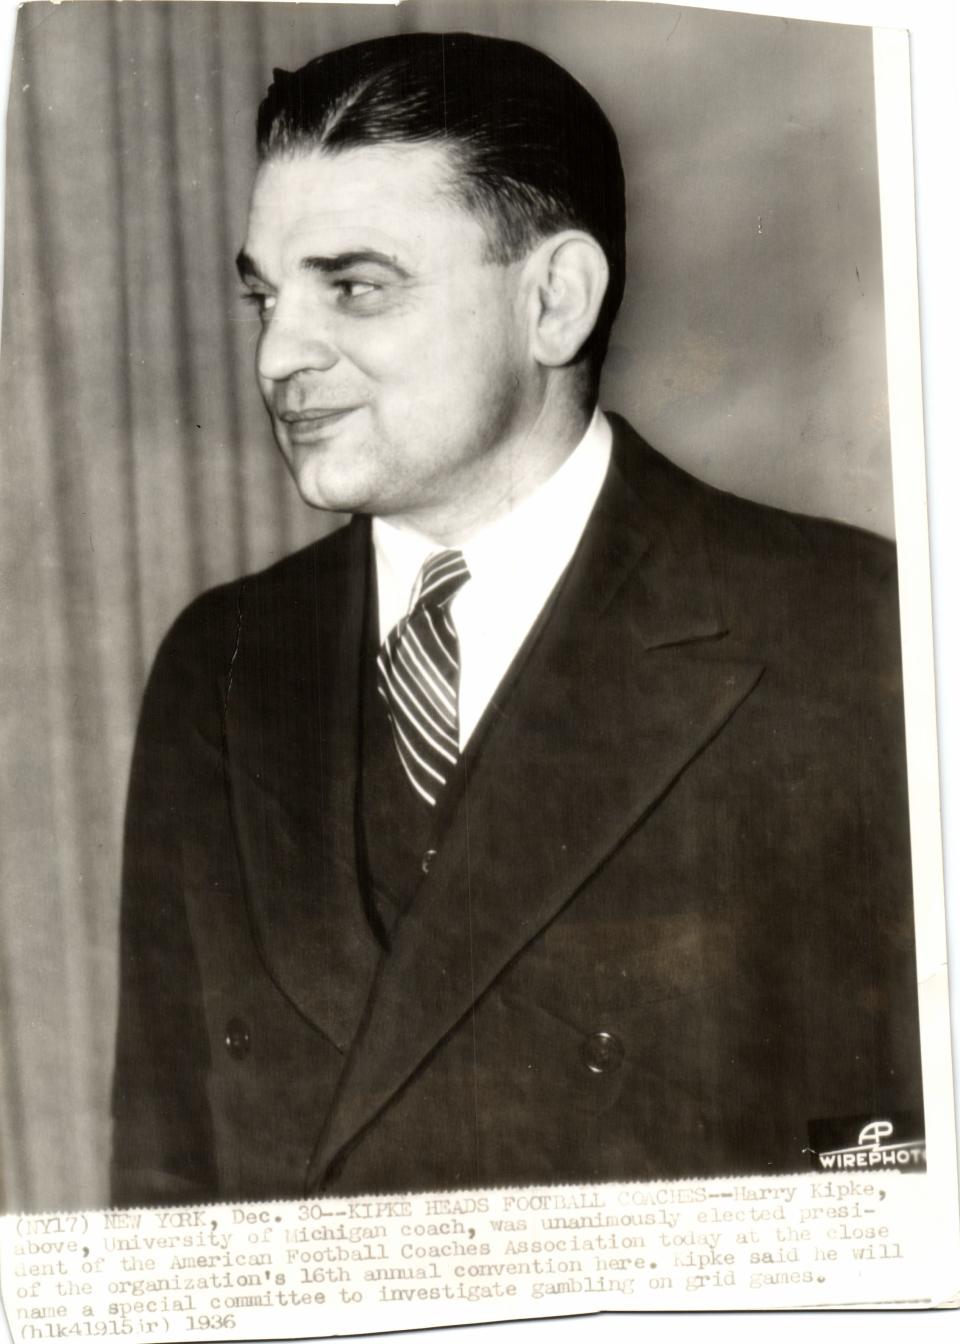 Harry Kipke, above, University of Michigan coach, was unanimously elected president of the American Football Coaches Association today at the close of the organization's 16th annual convention in 1937. Kipke said he will name a special committee to investigate gambling on grid games.